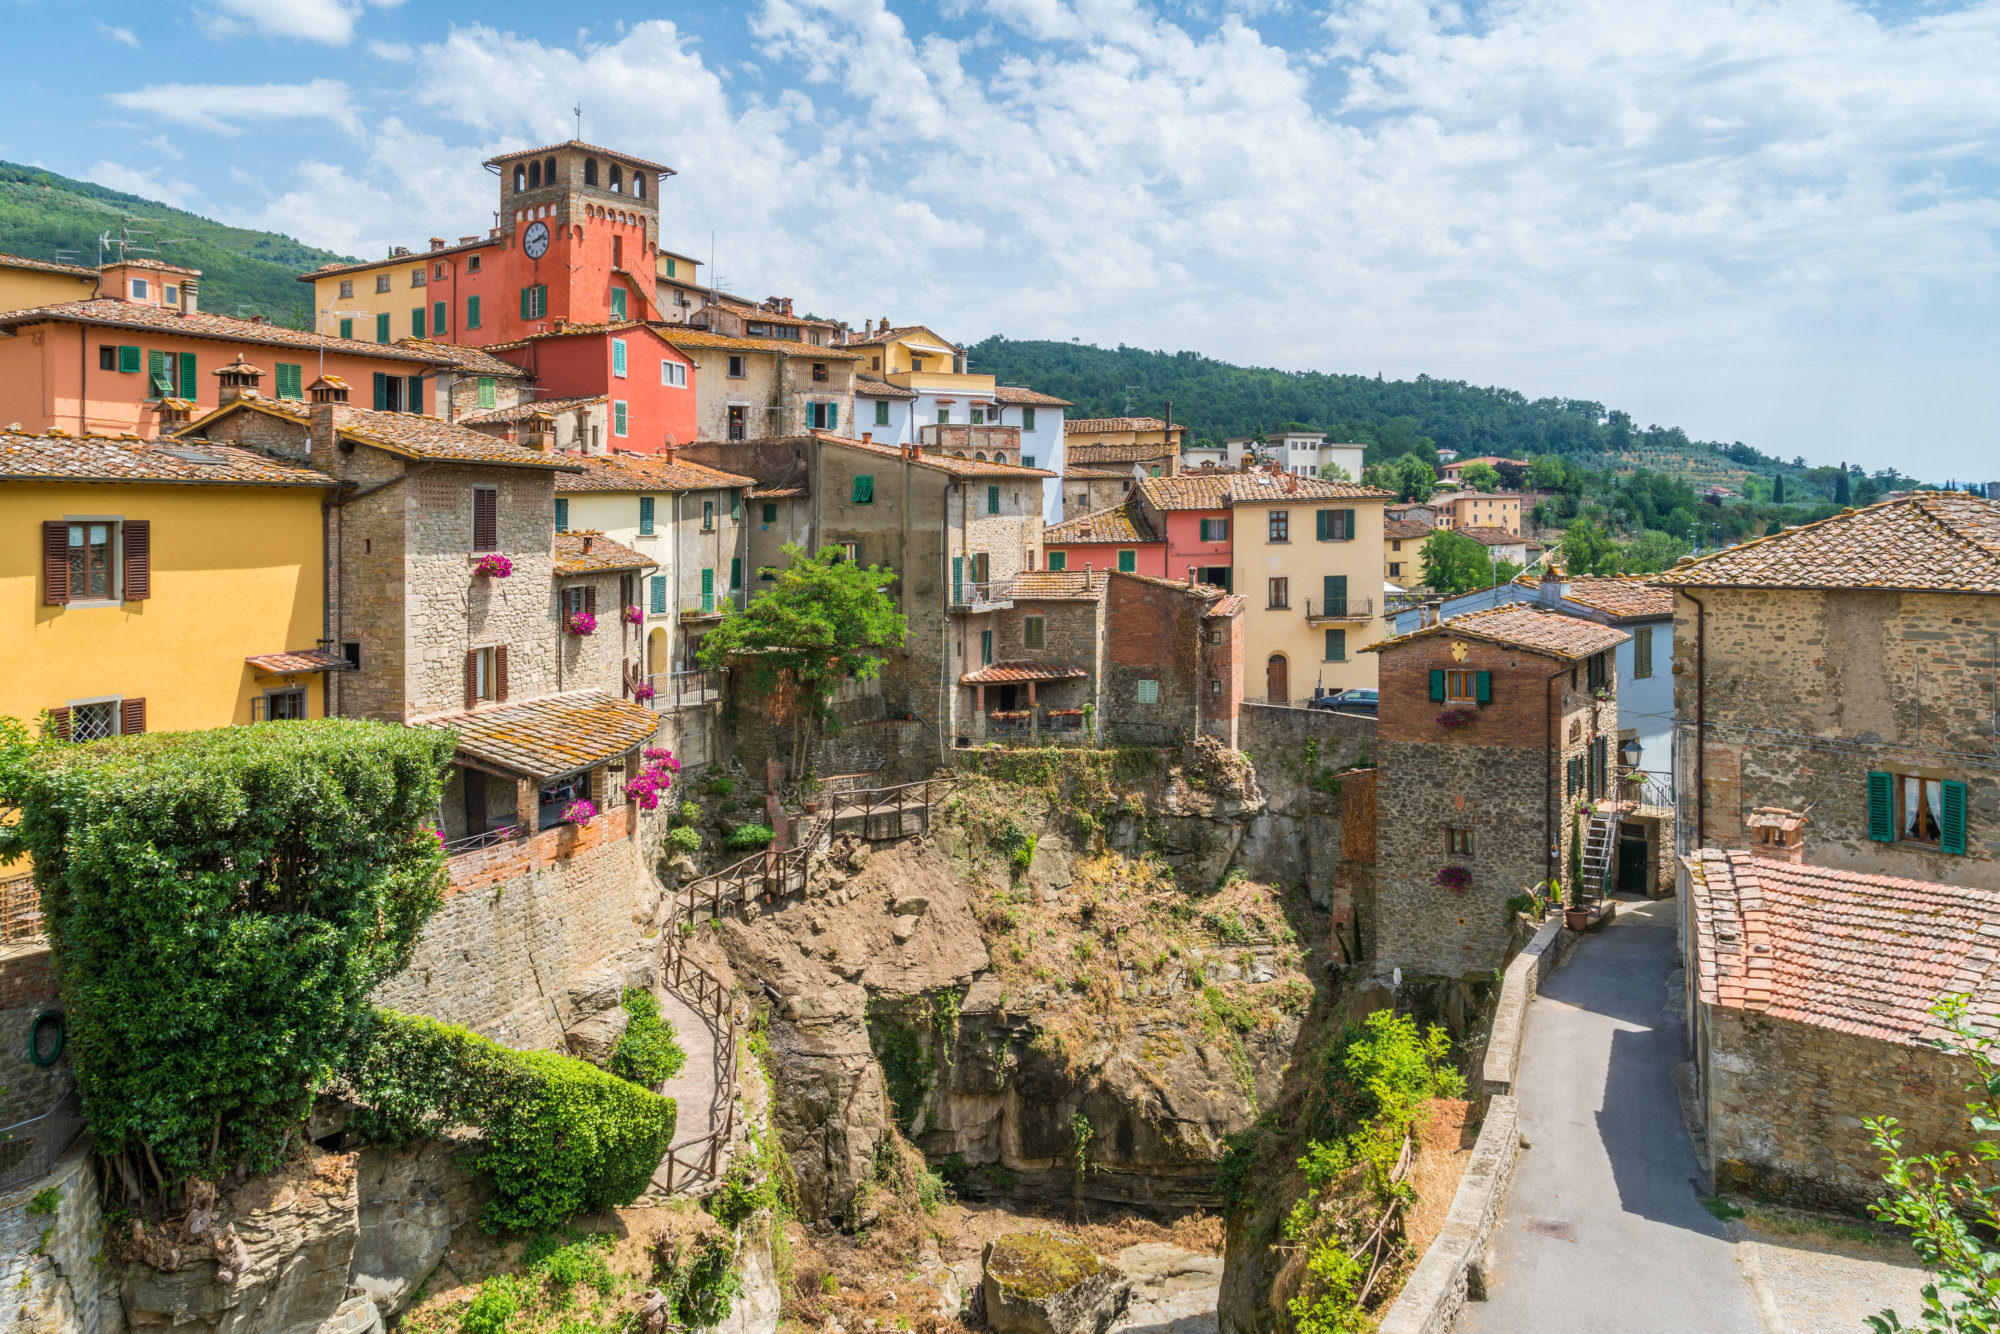 13 top places to visit in Tuscany, Italy | WTOP